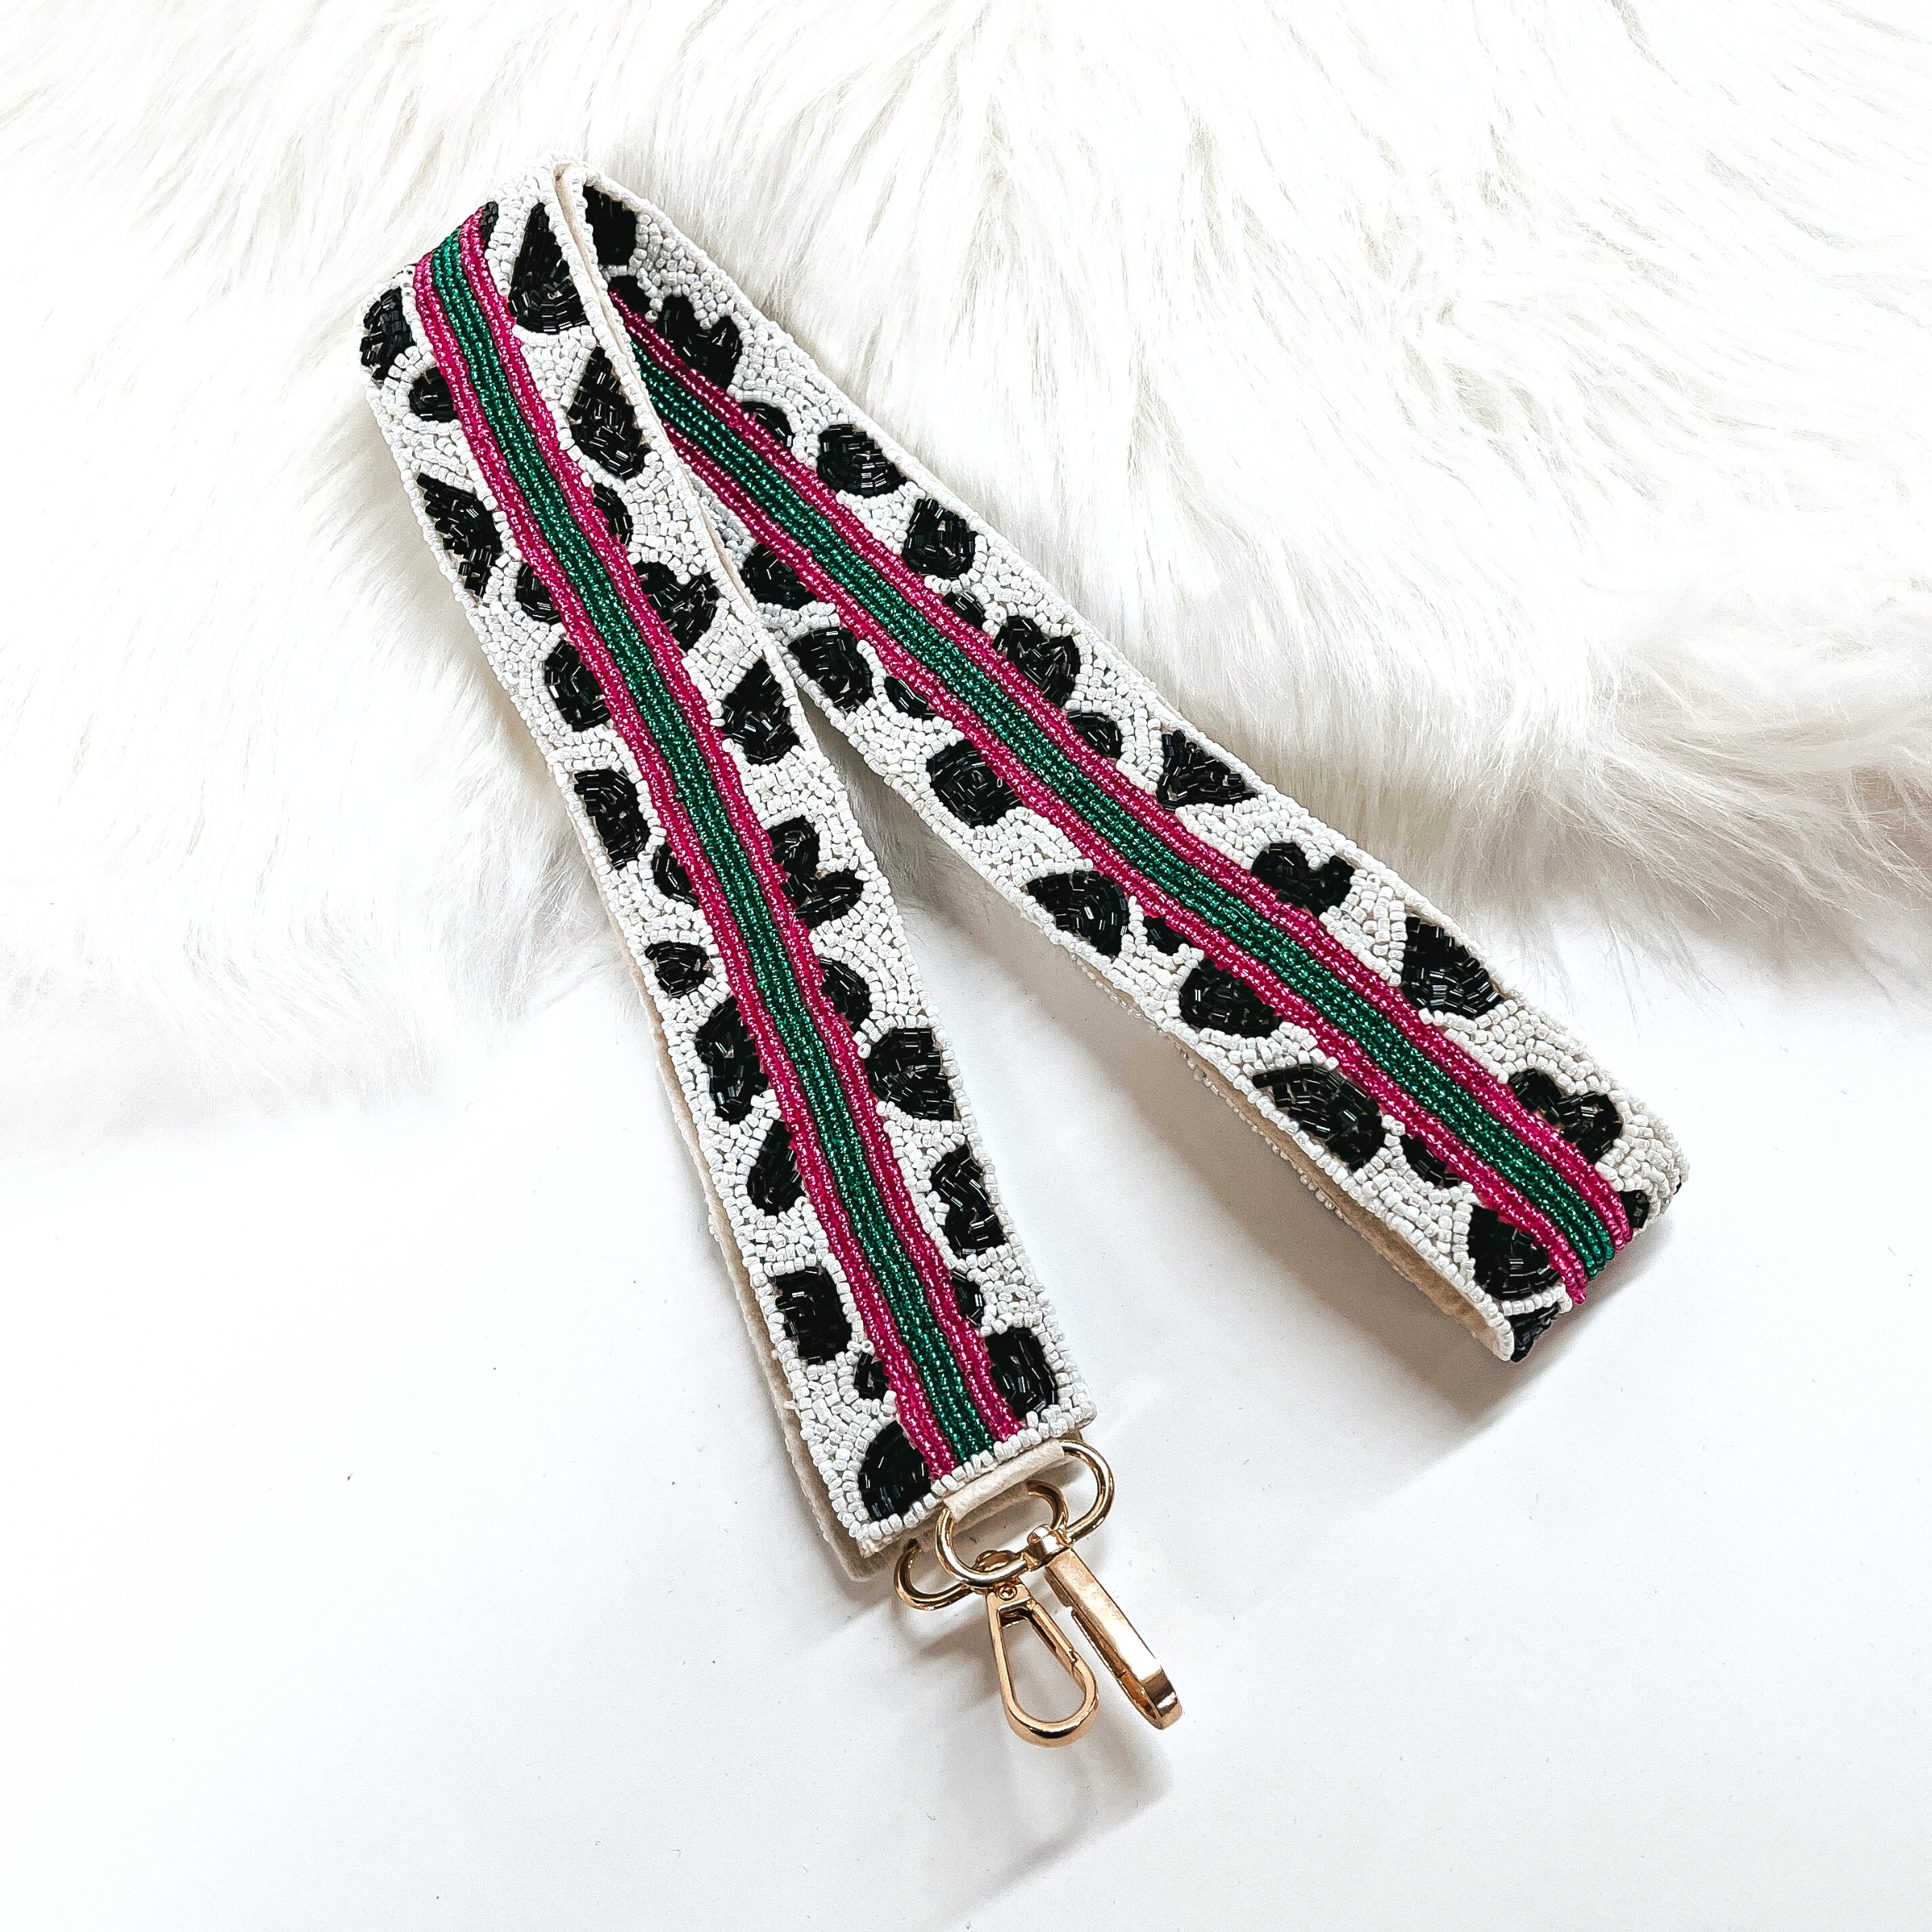 This is a white and black cow print beaded purse strap with three strap all along in pink and green, with gold clasps. This purse strap is taken on a white background and on white fur.